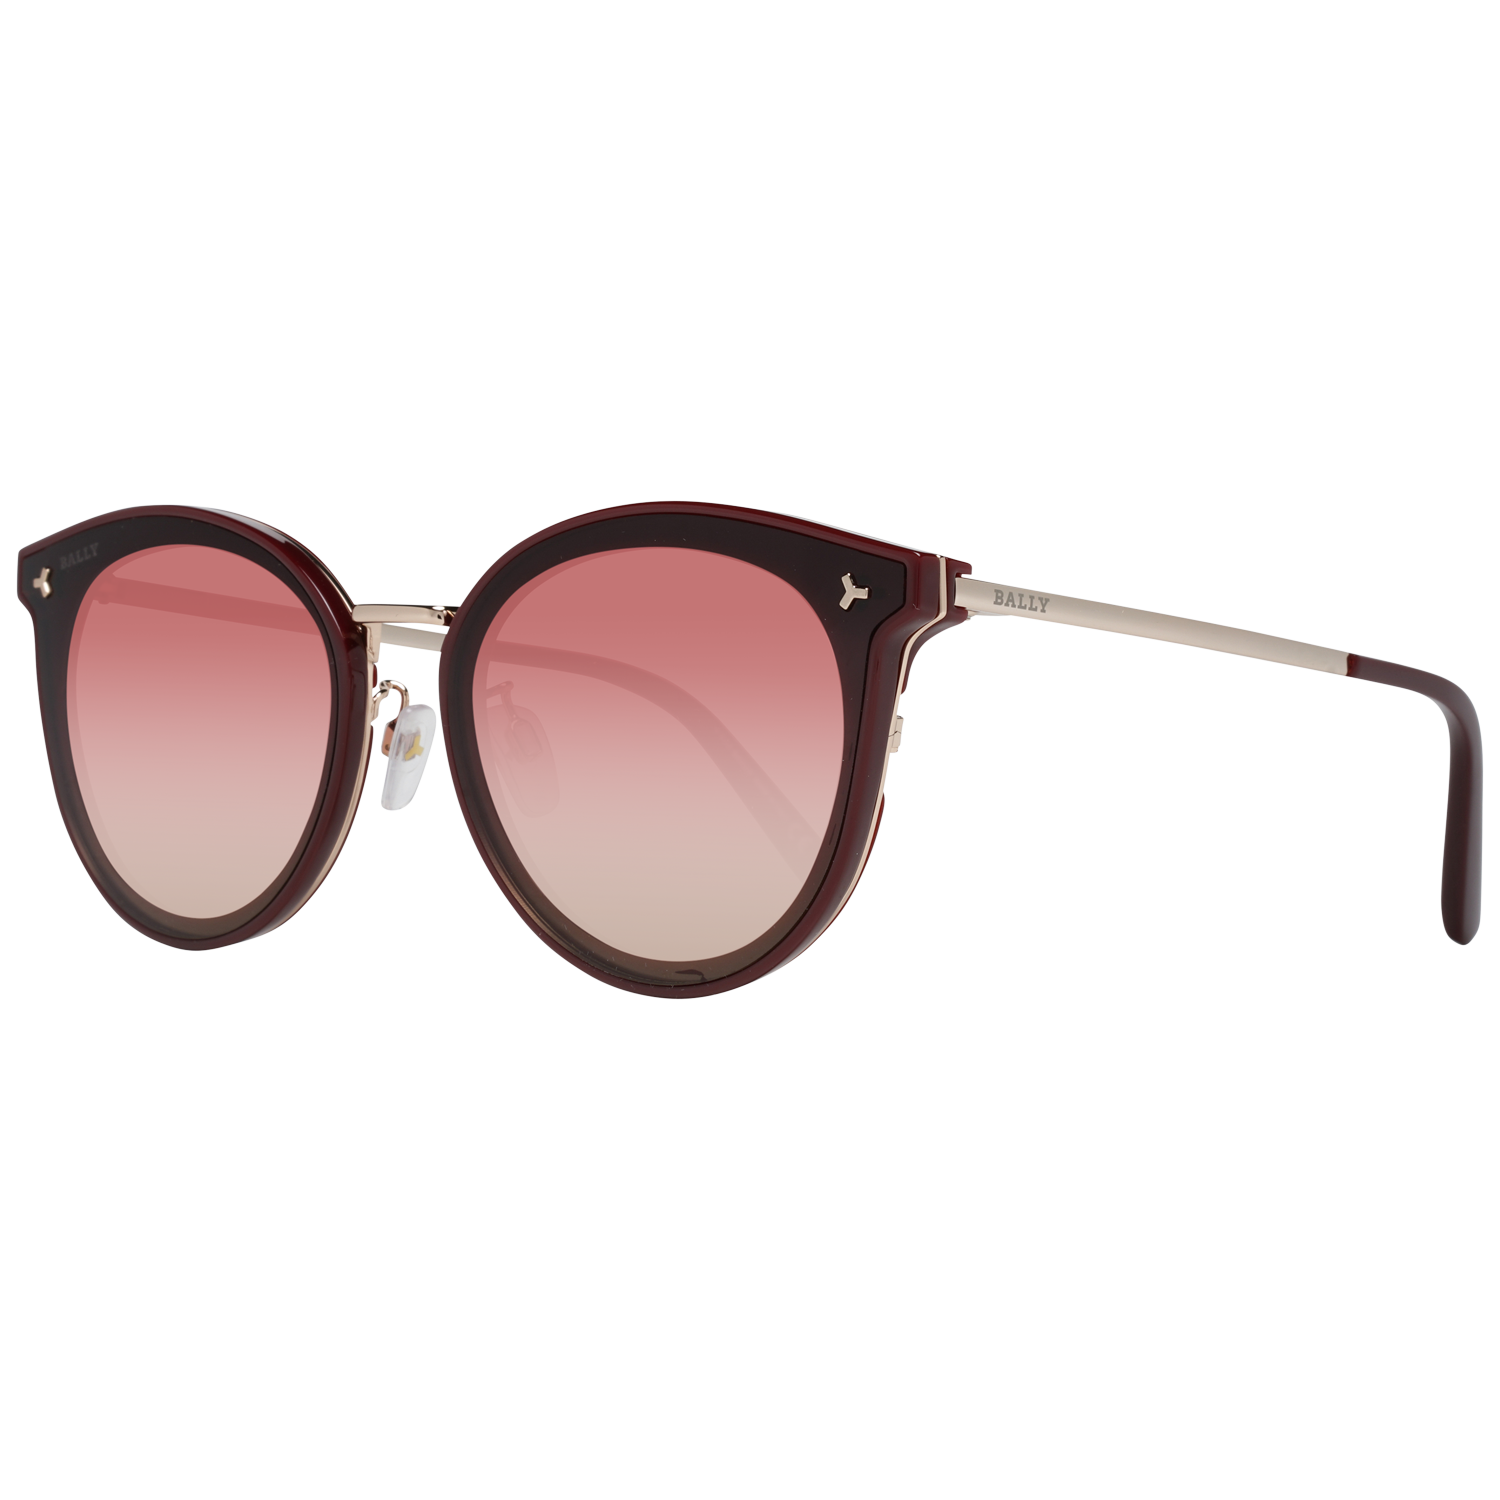 Bally Sunglasses BY0040-D 69T 65 Women
Frame color: Burgundy
Lenses color: Burgundy
Lenses material: Plastic
Filter category: 2
Style: Cat Eye
Lenses effect: Gradient
Protection: 100% UVA & UVB
Size: 65-18-145
Lenses width: 65
Lenses height: 53
Bridge width: 18
Frame width: 154
Temples length: 145
Shipment includes: Case, cleaning cloth
Spring hinge: No
Extra: No extra